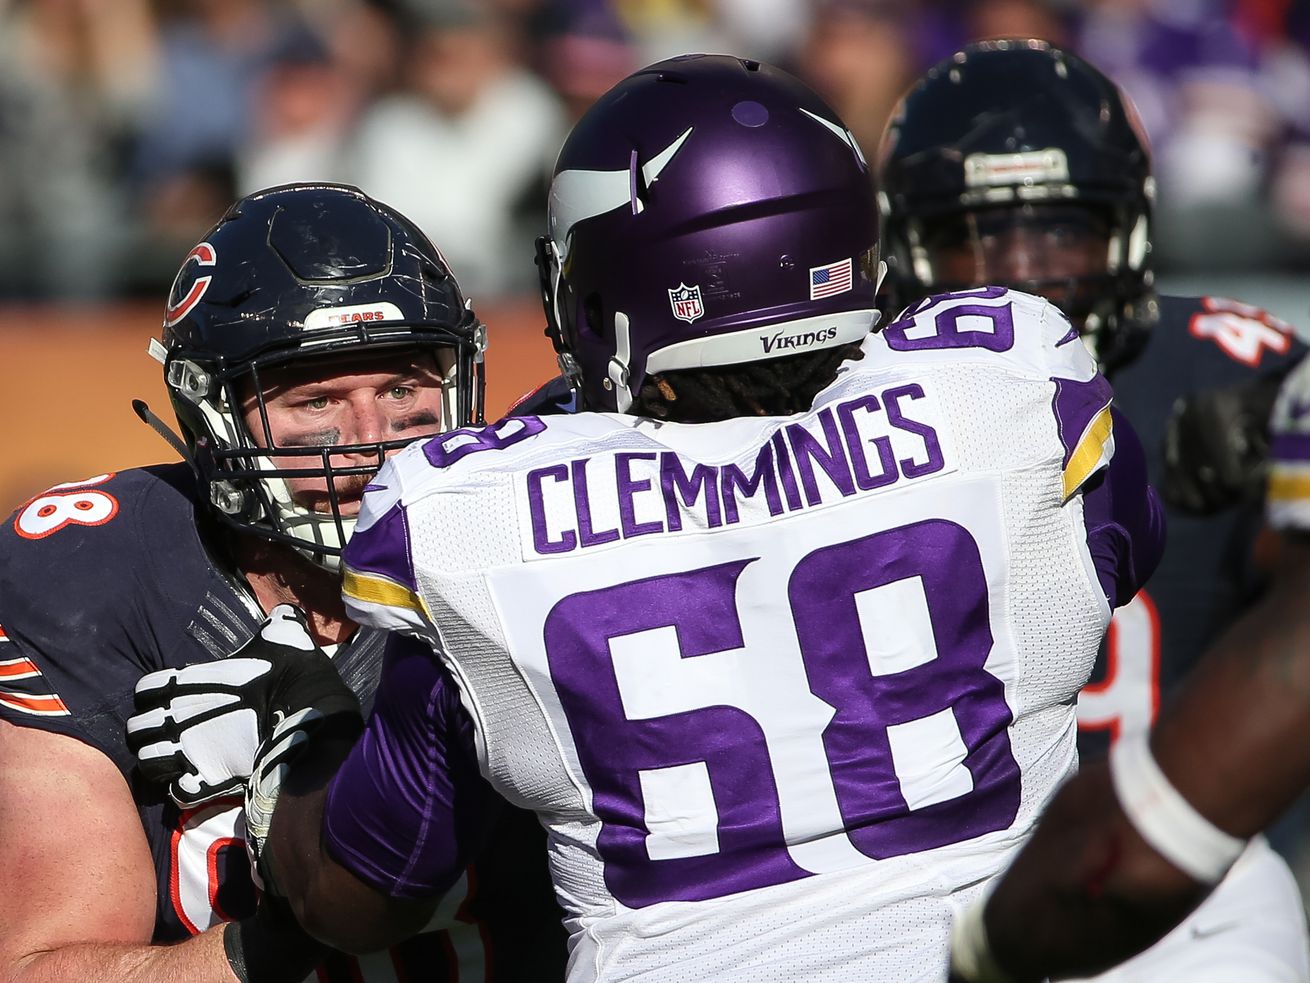 Vikings tackle T.J. Clemmings blocks the Bears’ Mitch Unrein in 2015 at Soldier Field.